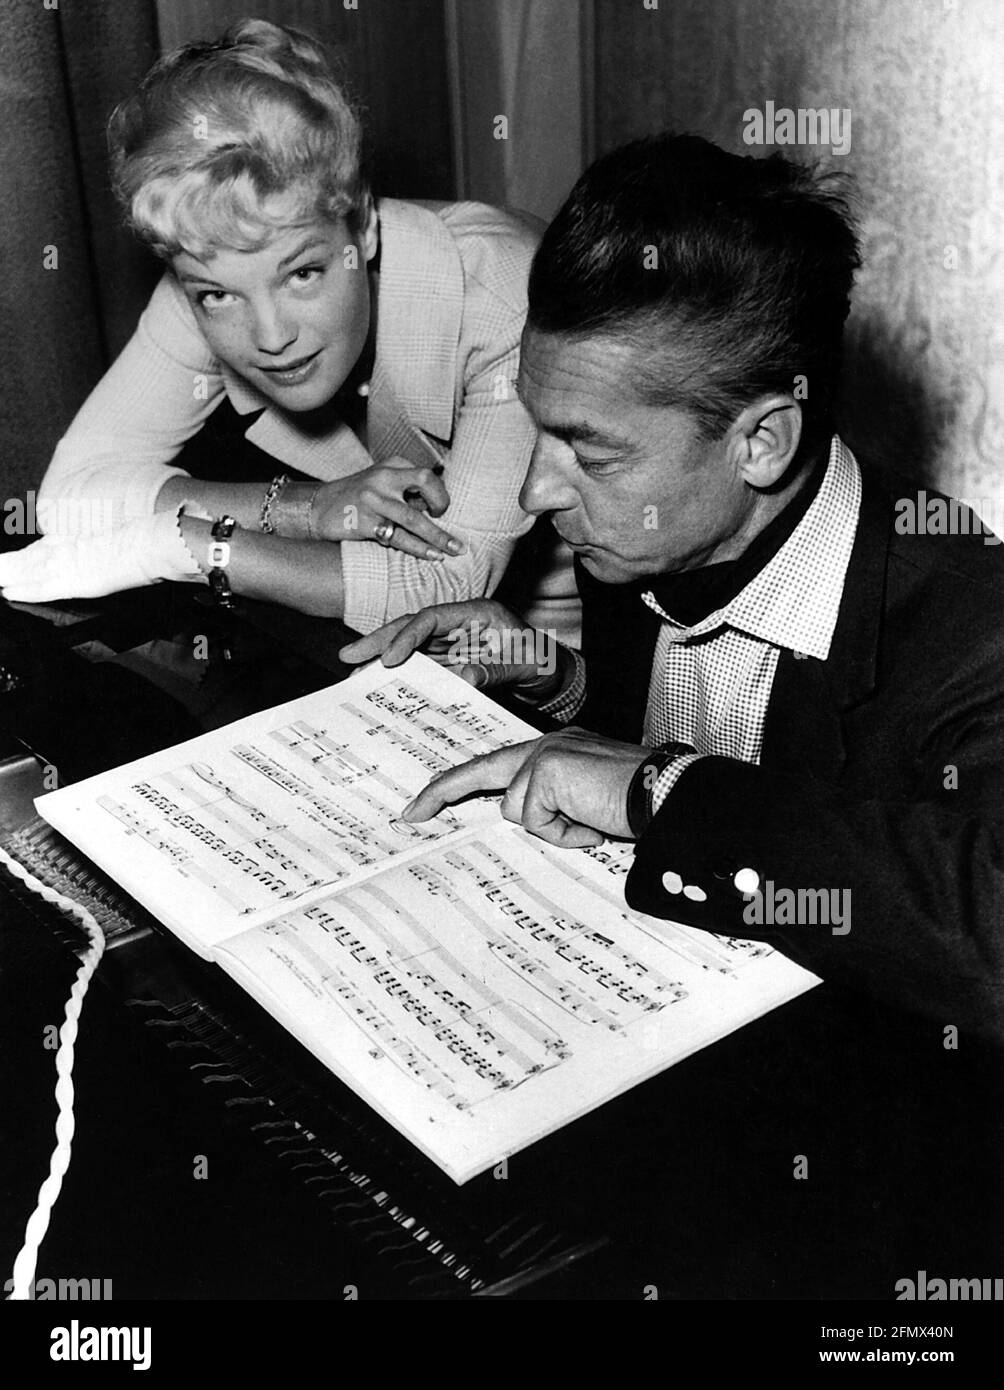 Schneider, Romy, 23.9.1938 - 29.5.1982, German actress, half length, with Herbert von Karajan, 1958, ADDITIONAL-RIGHTS-CLEARANCE-INFO-NOT-AVAILABLE Stock Photo